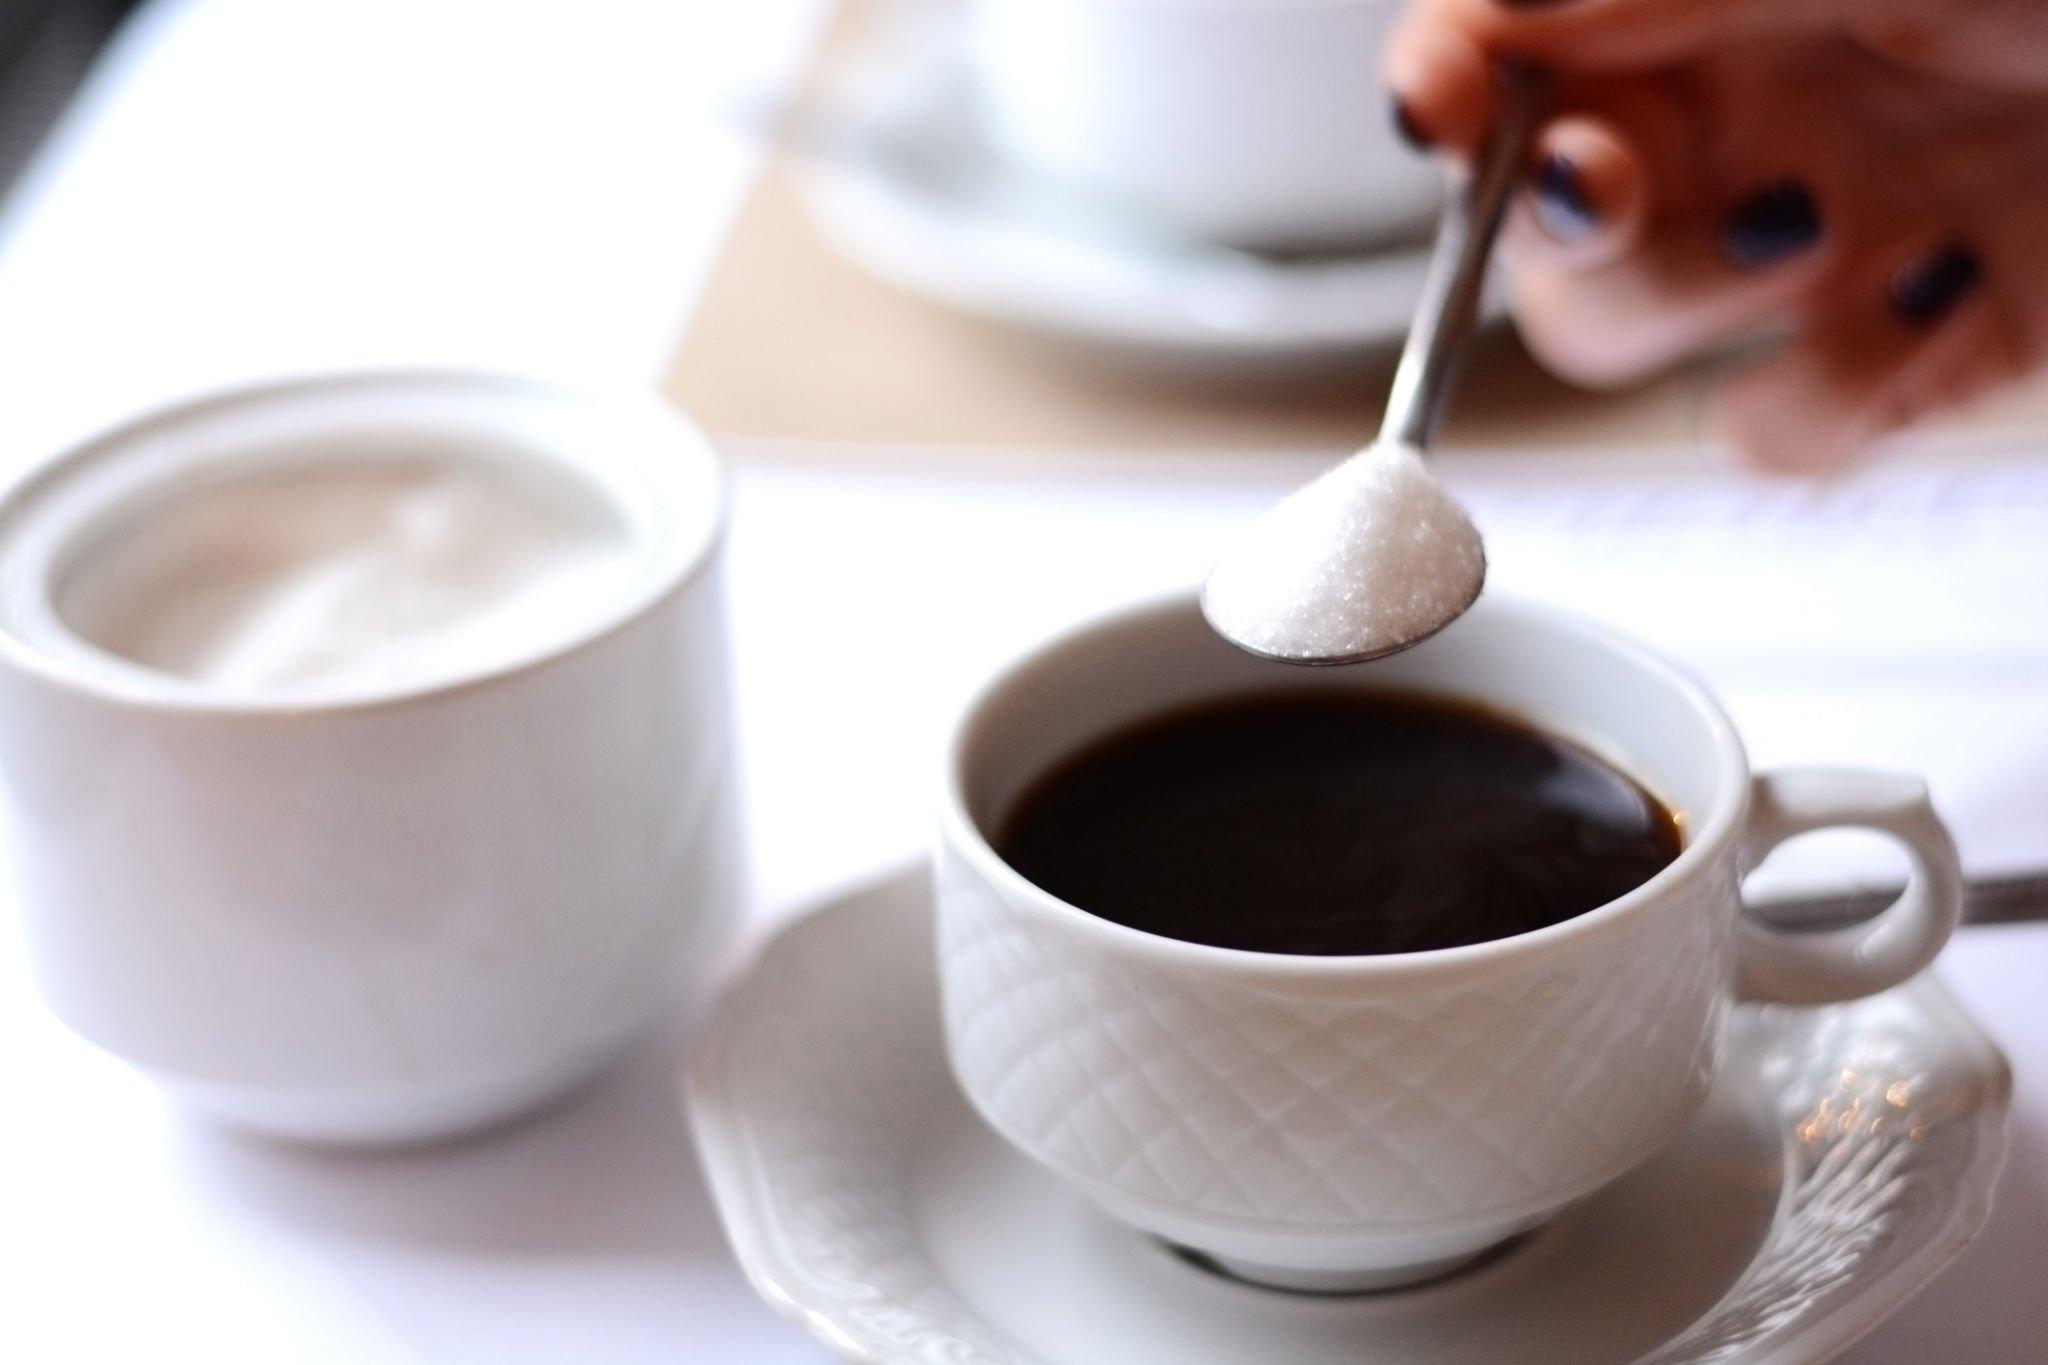 Pros & Cons of Coffee: Is Coffee Good or Bad for You?